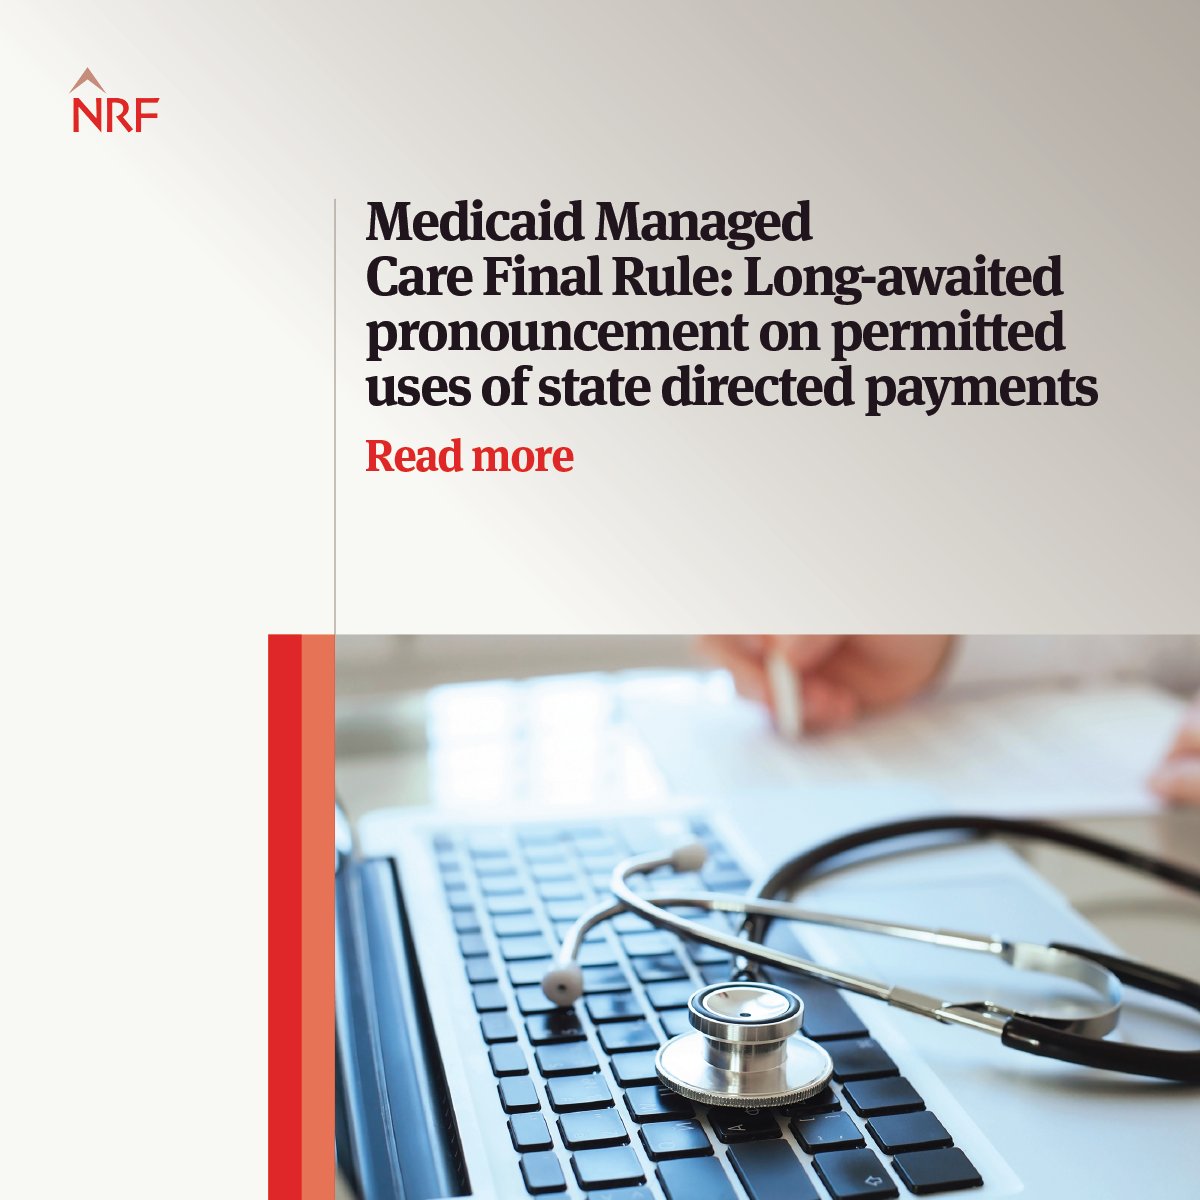 Susan Feigin Harris discusses the Centers for Medicare & Medicaid Services (CMS) Medicaid Managed Care Final Rule governing Medicaid and Children’s Health Insurance Program (CHIP) managed care access, finance and quality. ow.ly/MJKj50Rpqxm